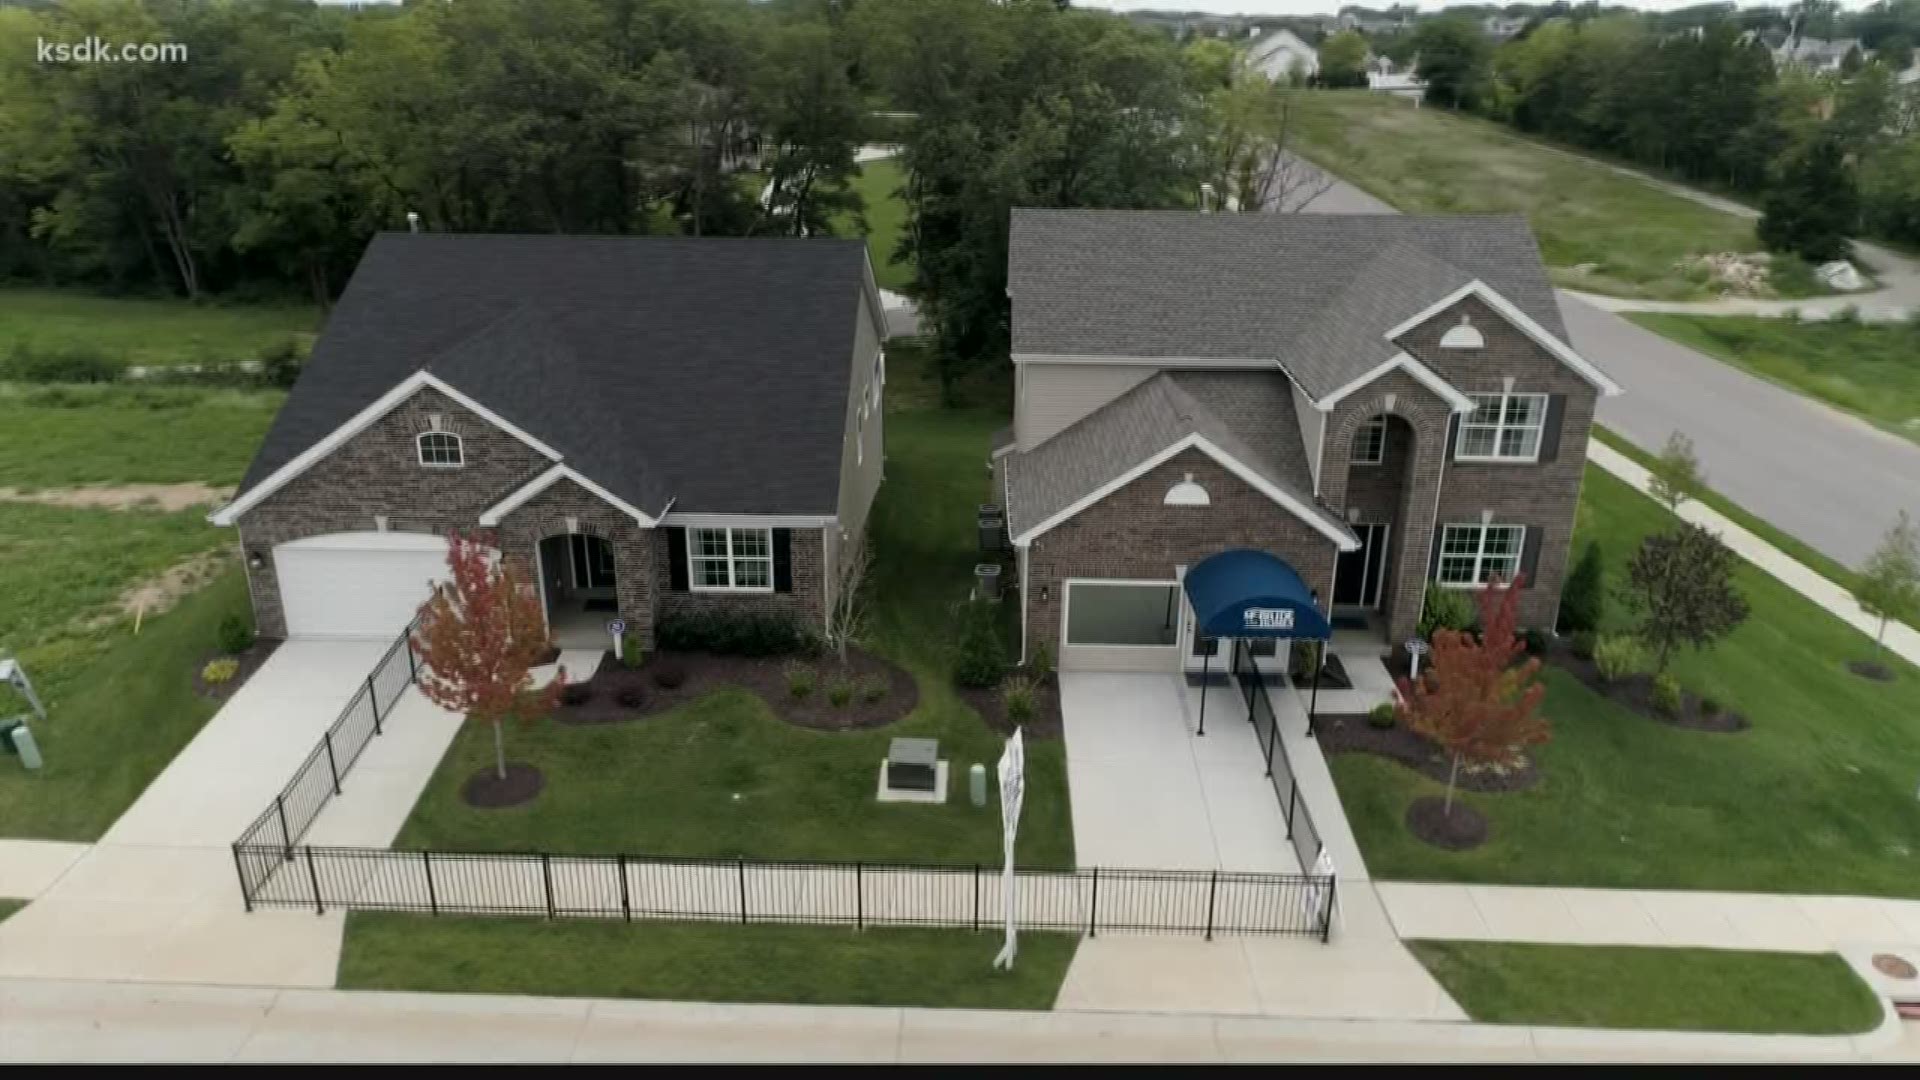 In this installment of our Amazing Homes series, we visit Wyndstone, a McBride Homes community in Lake St. Louis.